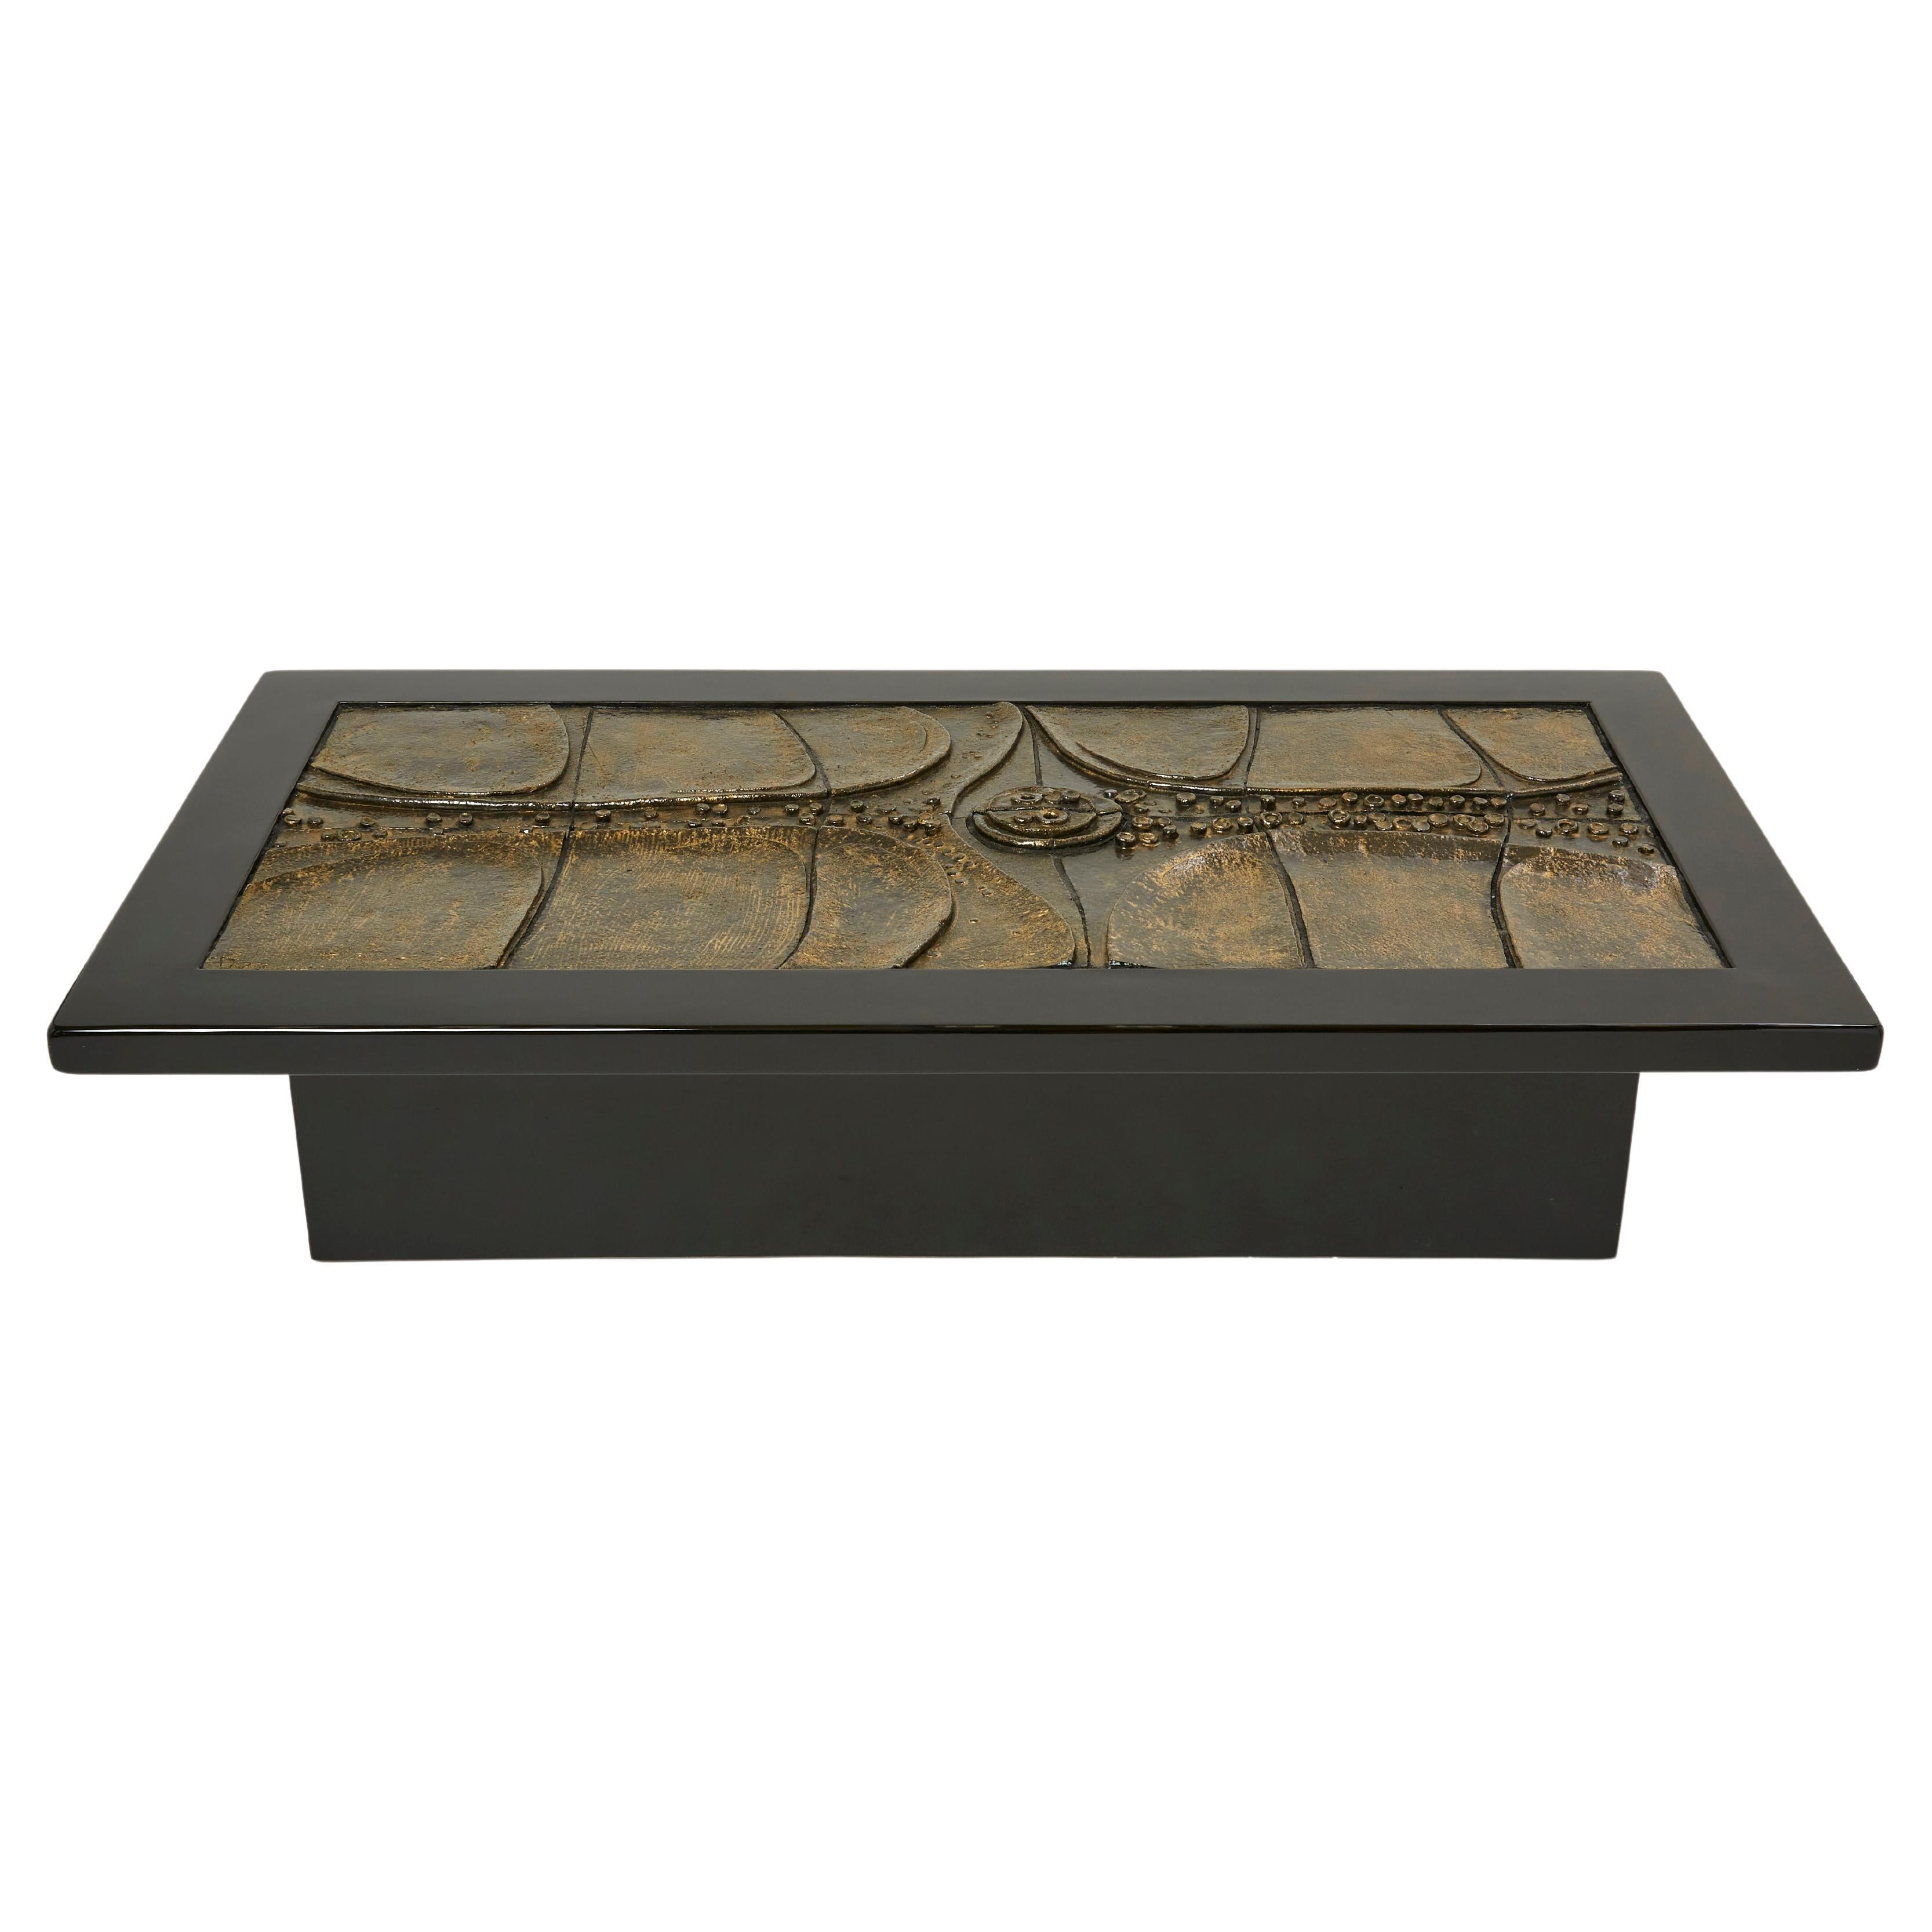 Belgian Brutalist Ceramic Lacquer Coffee Table by Pia Manu 1970s